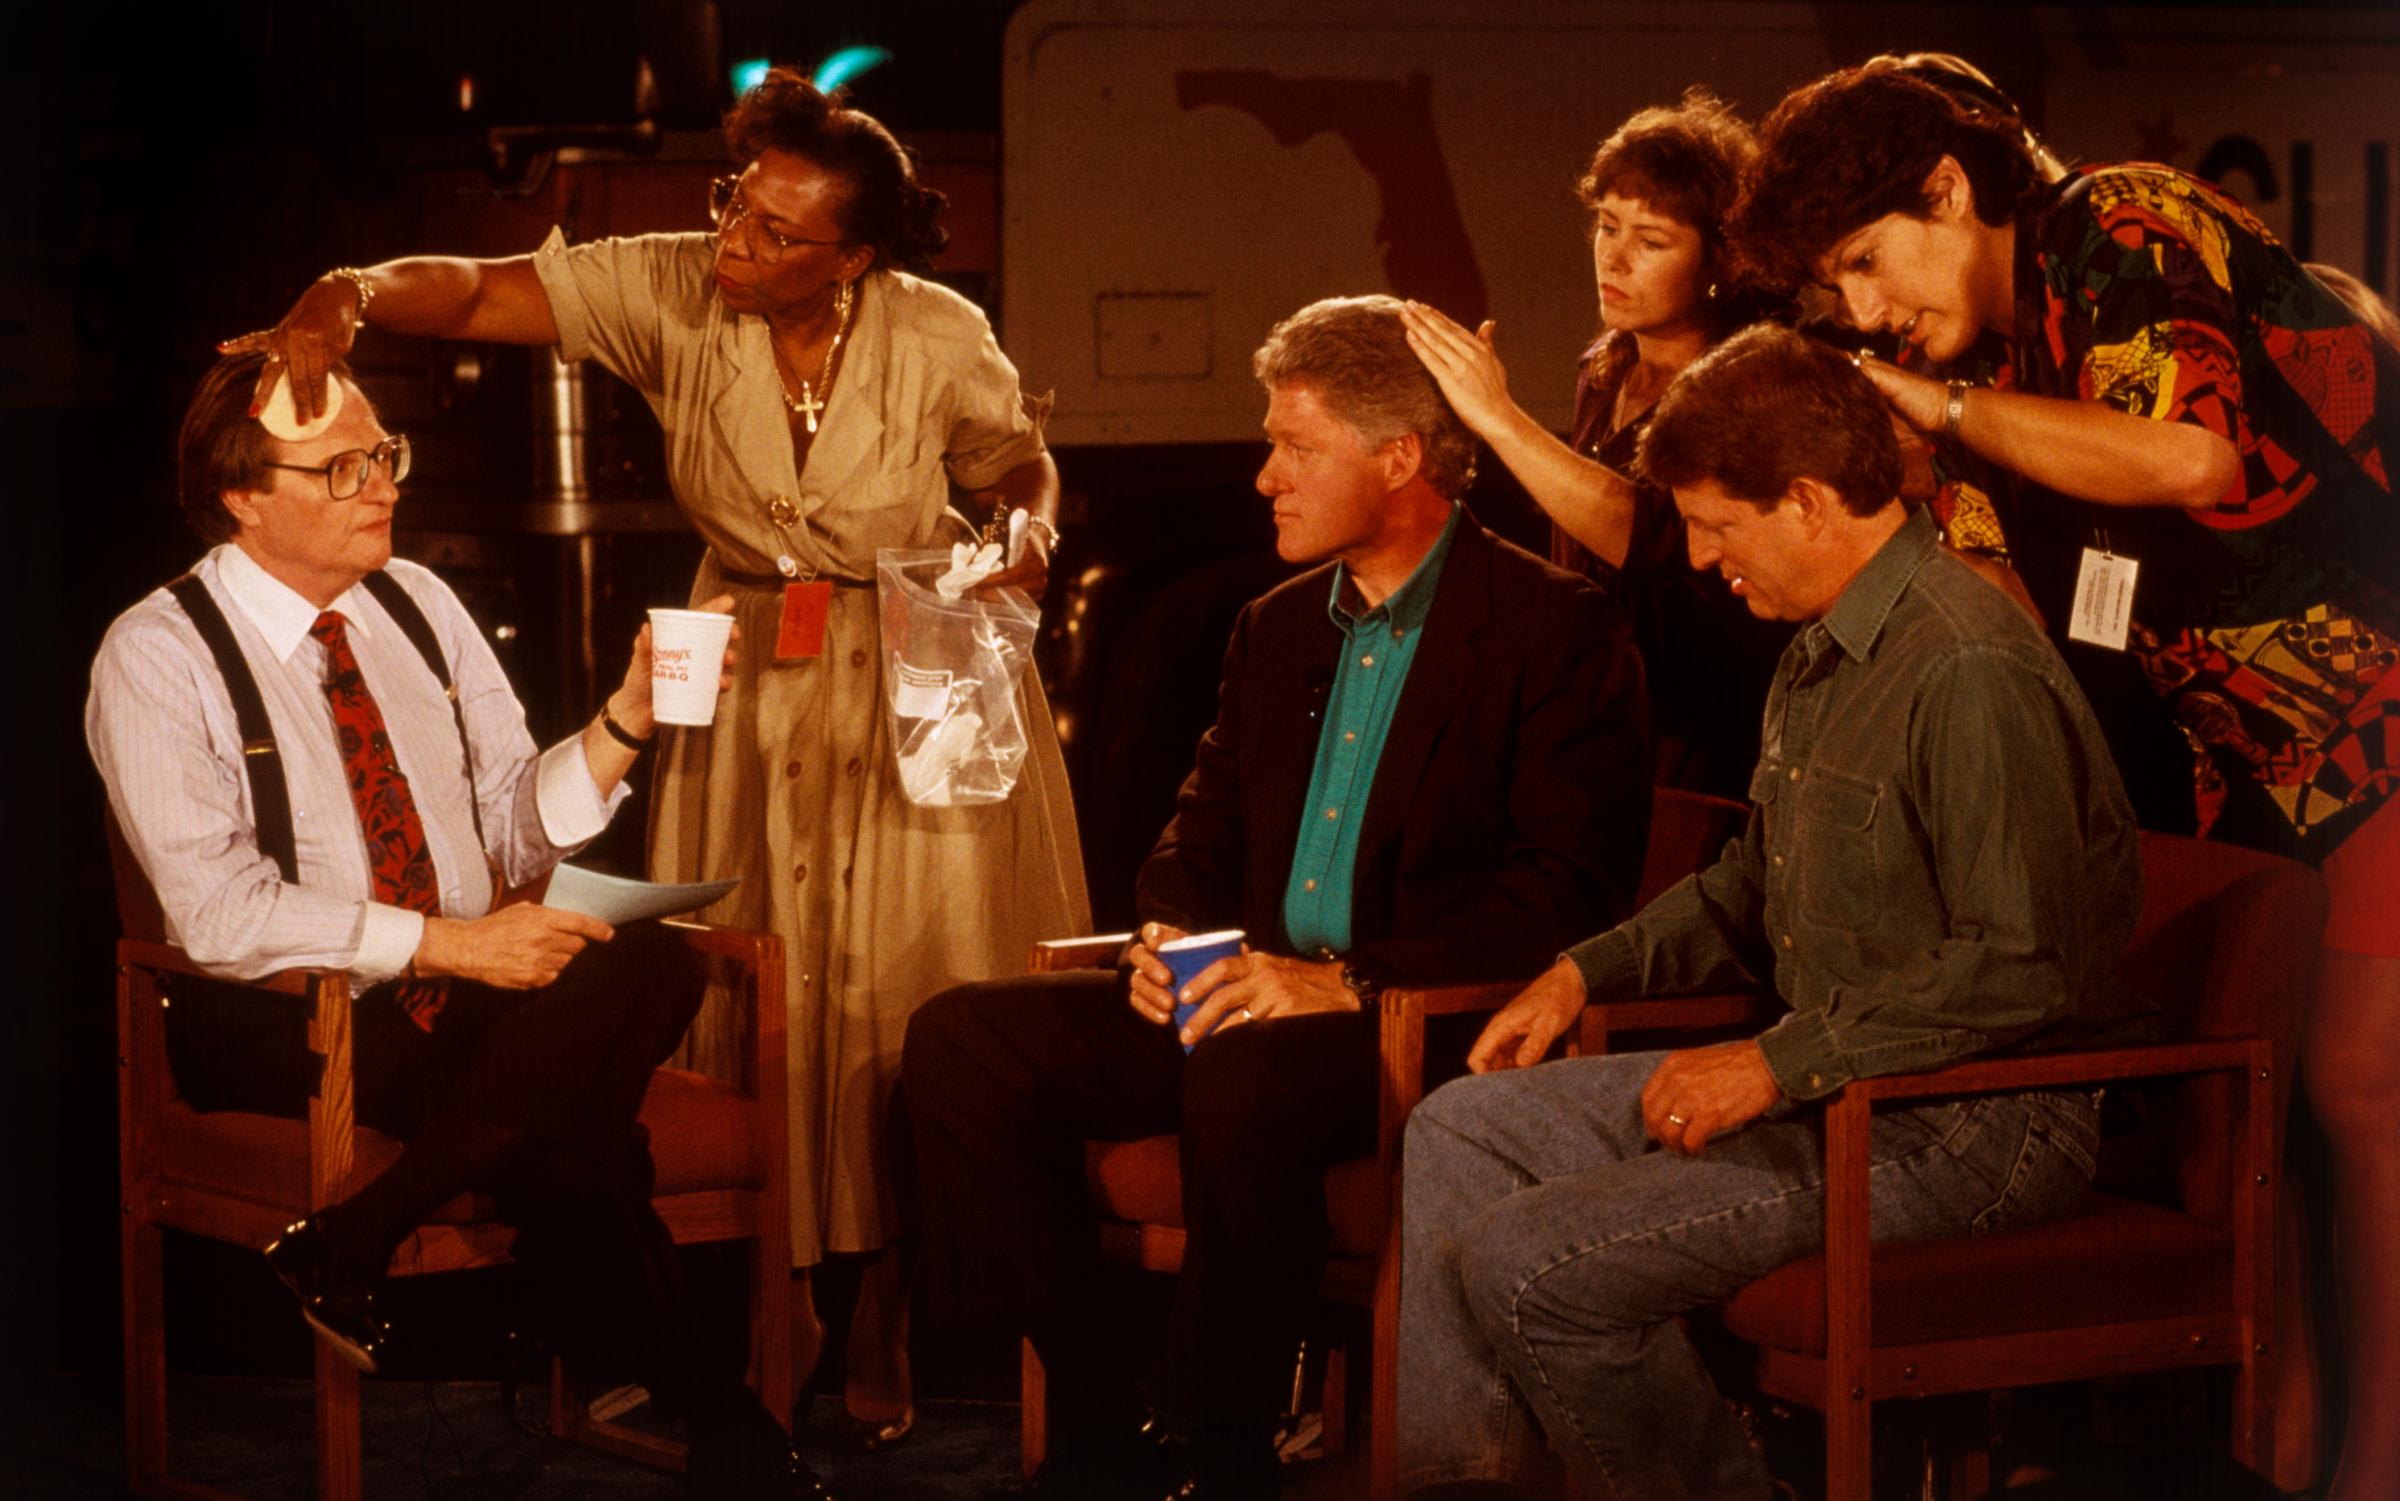 Larry King, Bill Clinton, and Al Gore preparing for a television interview, 1992.